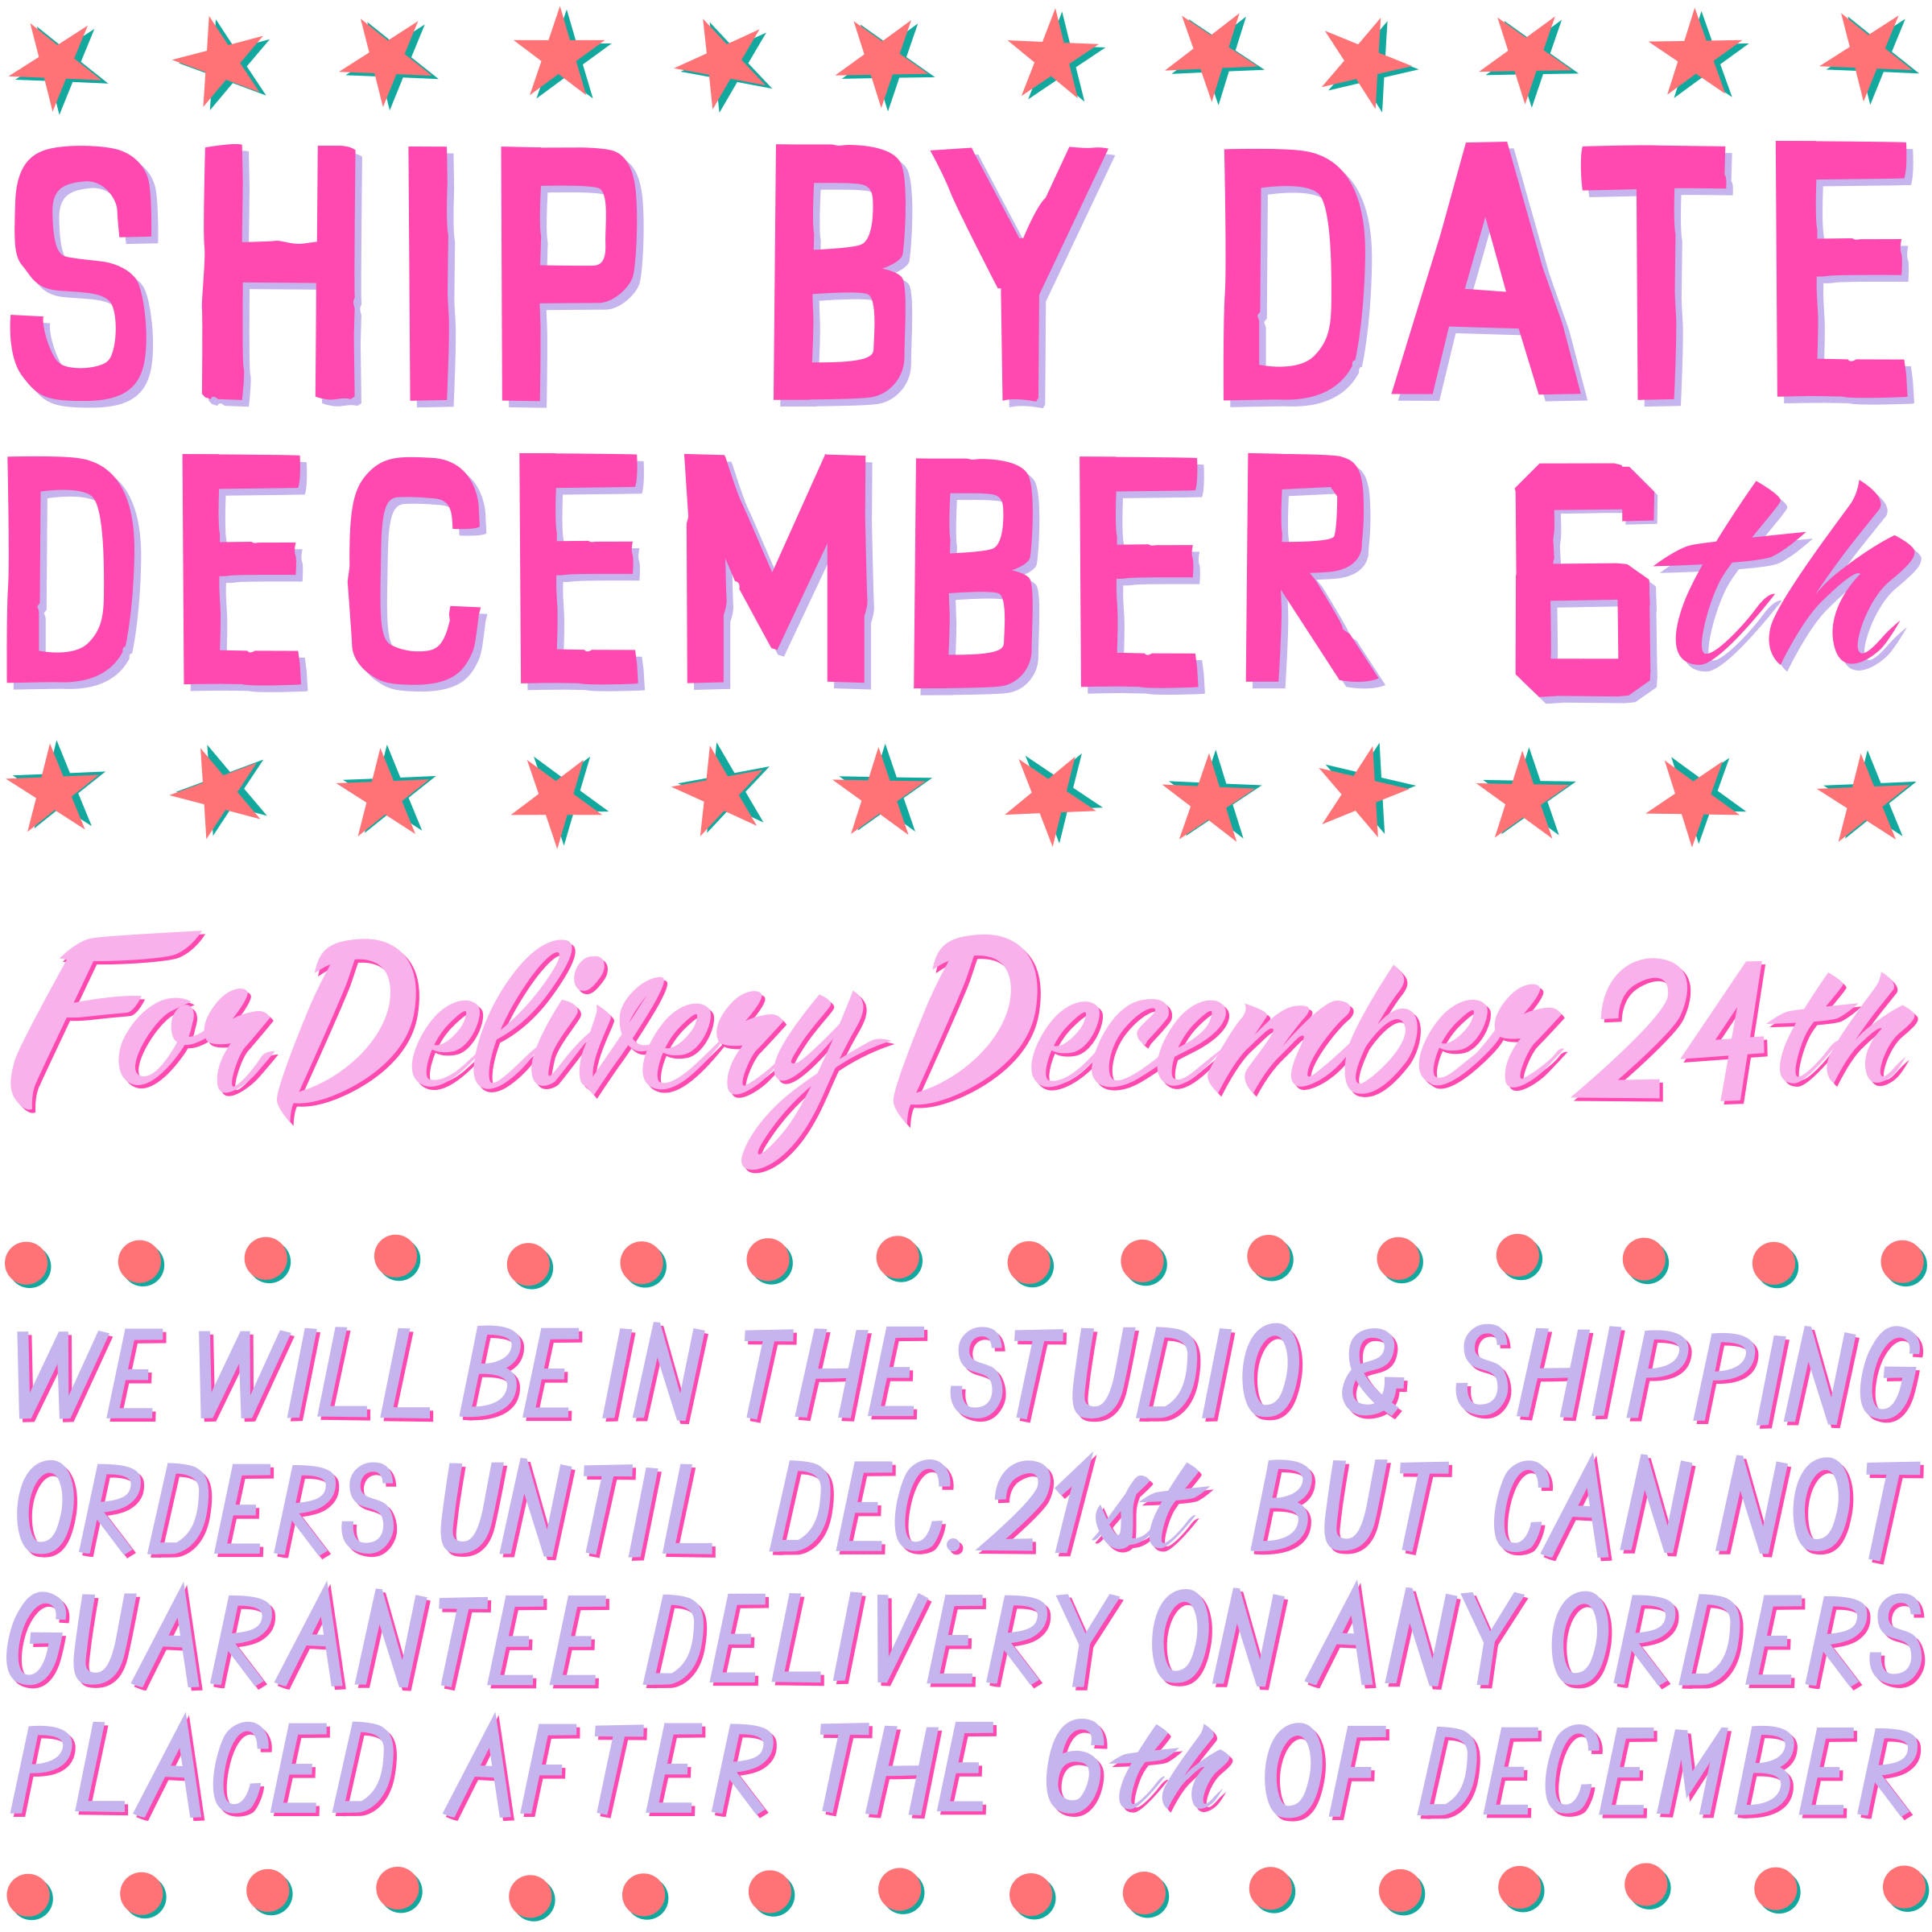 SHIP BY DATES HOLIDAY 2021